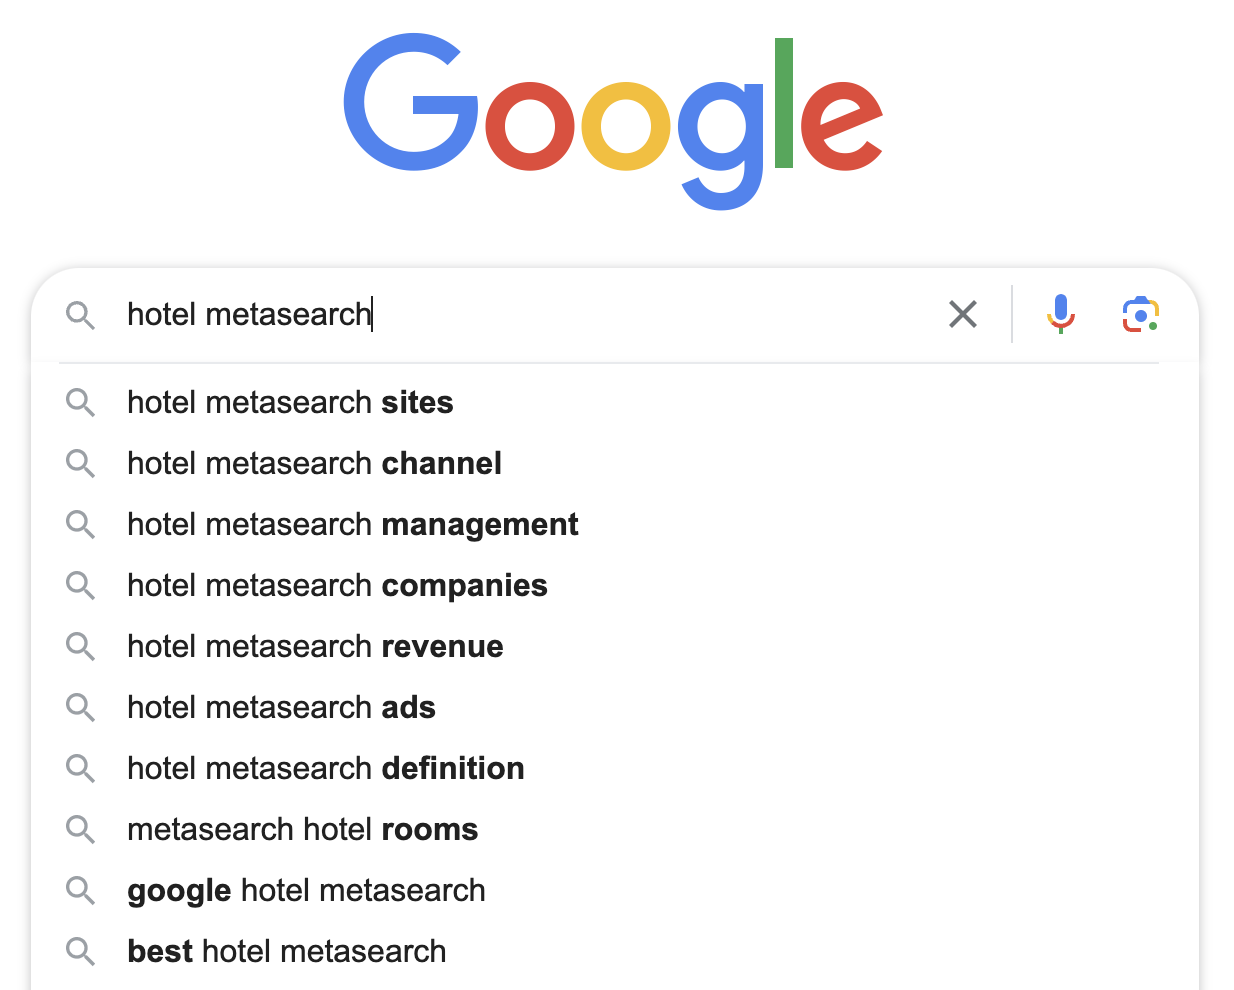 Google search results